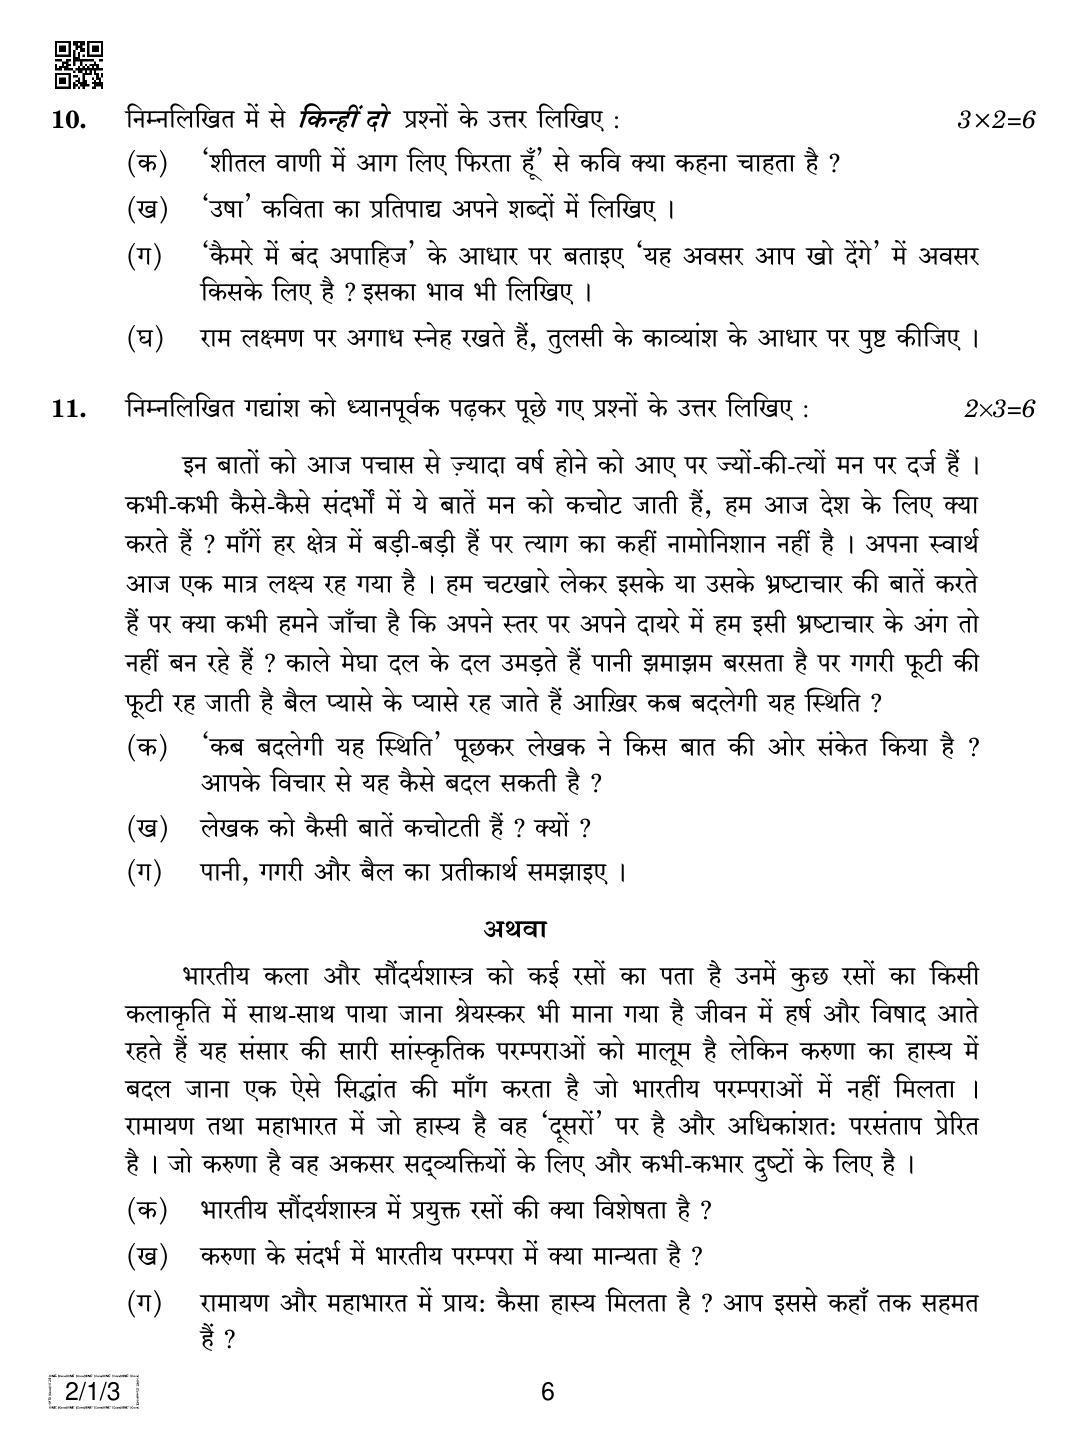 CBSE Class 12 2-1-3 HINDI CORE 2019 Compartment Question Paper - Page 6